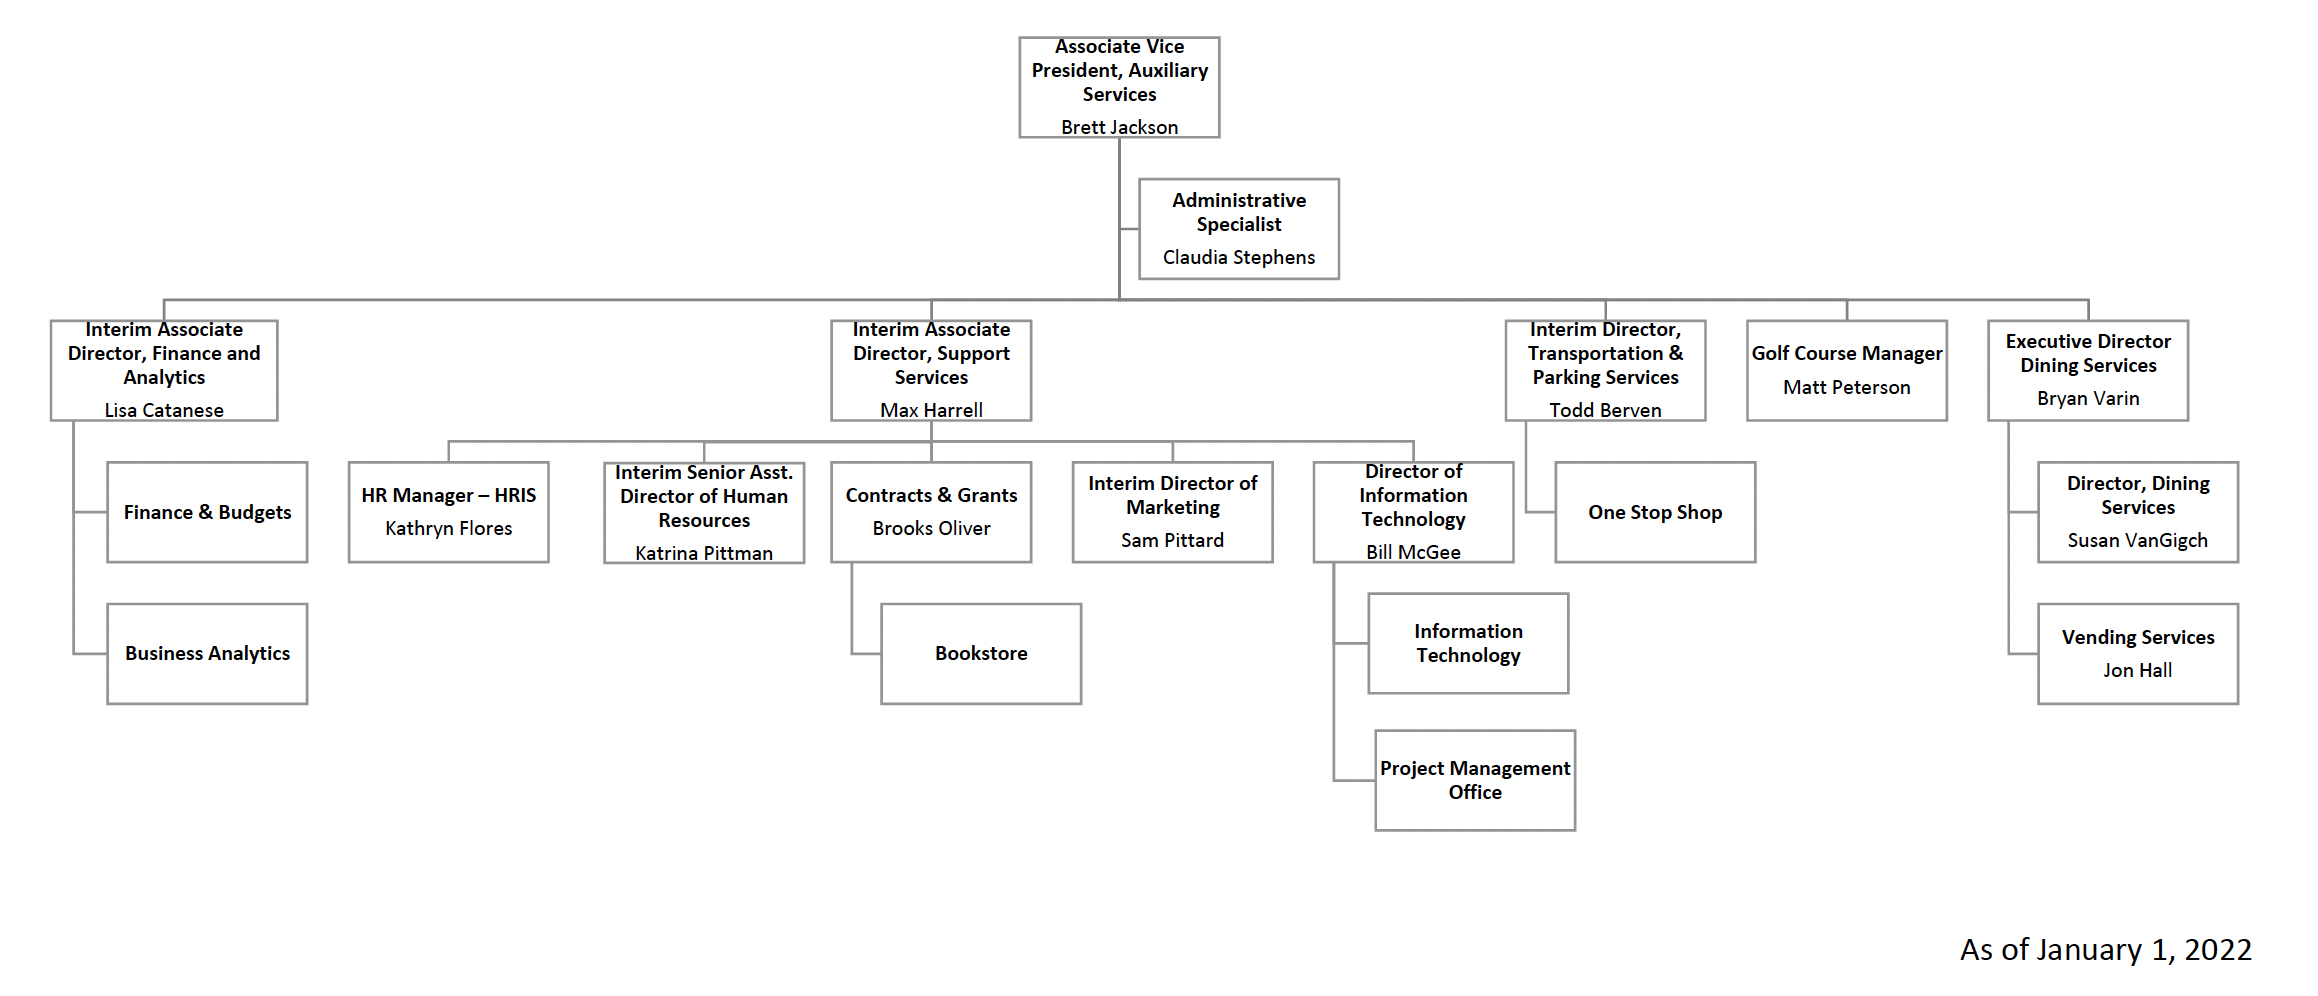 A chart that describes the organization of roles within Auxiliary. 